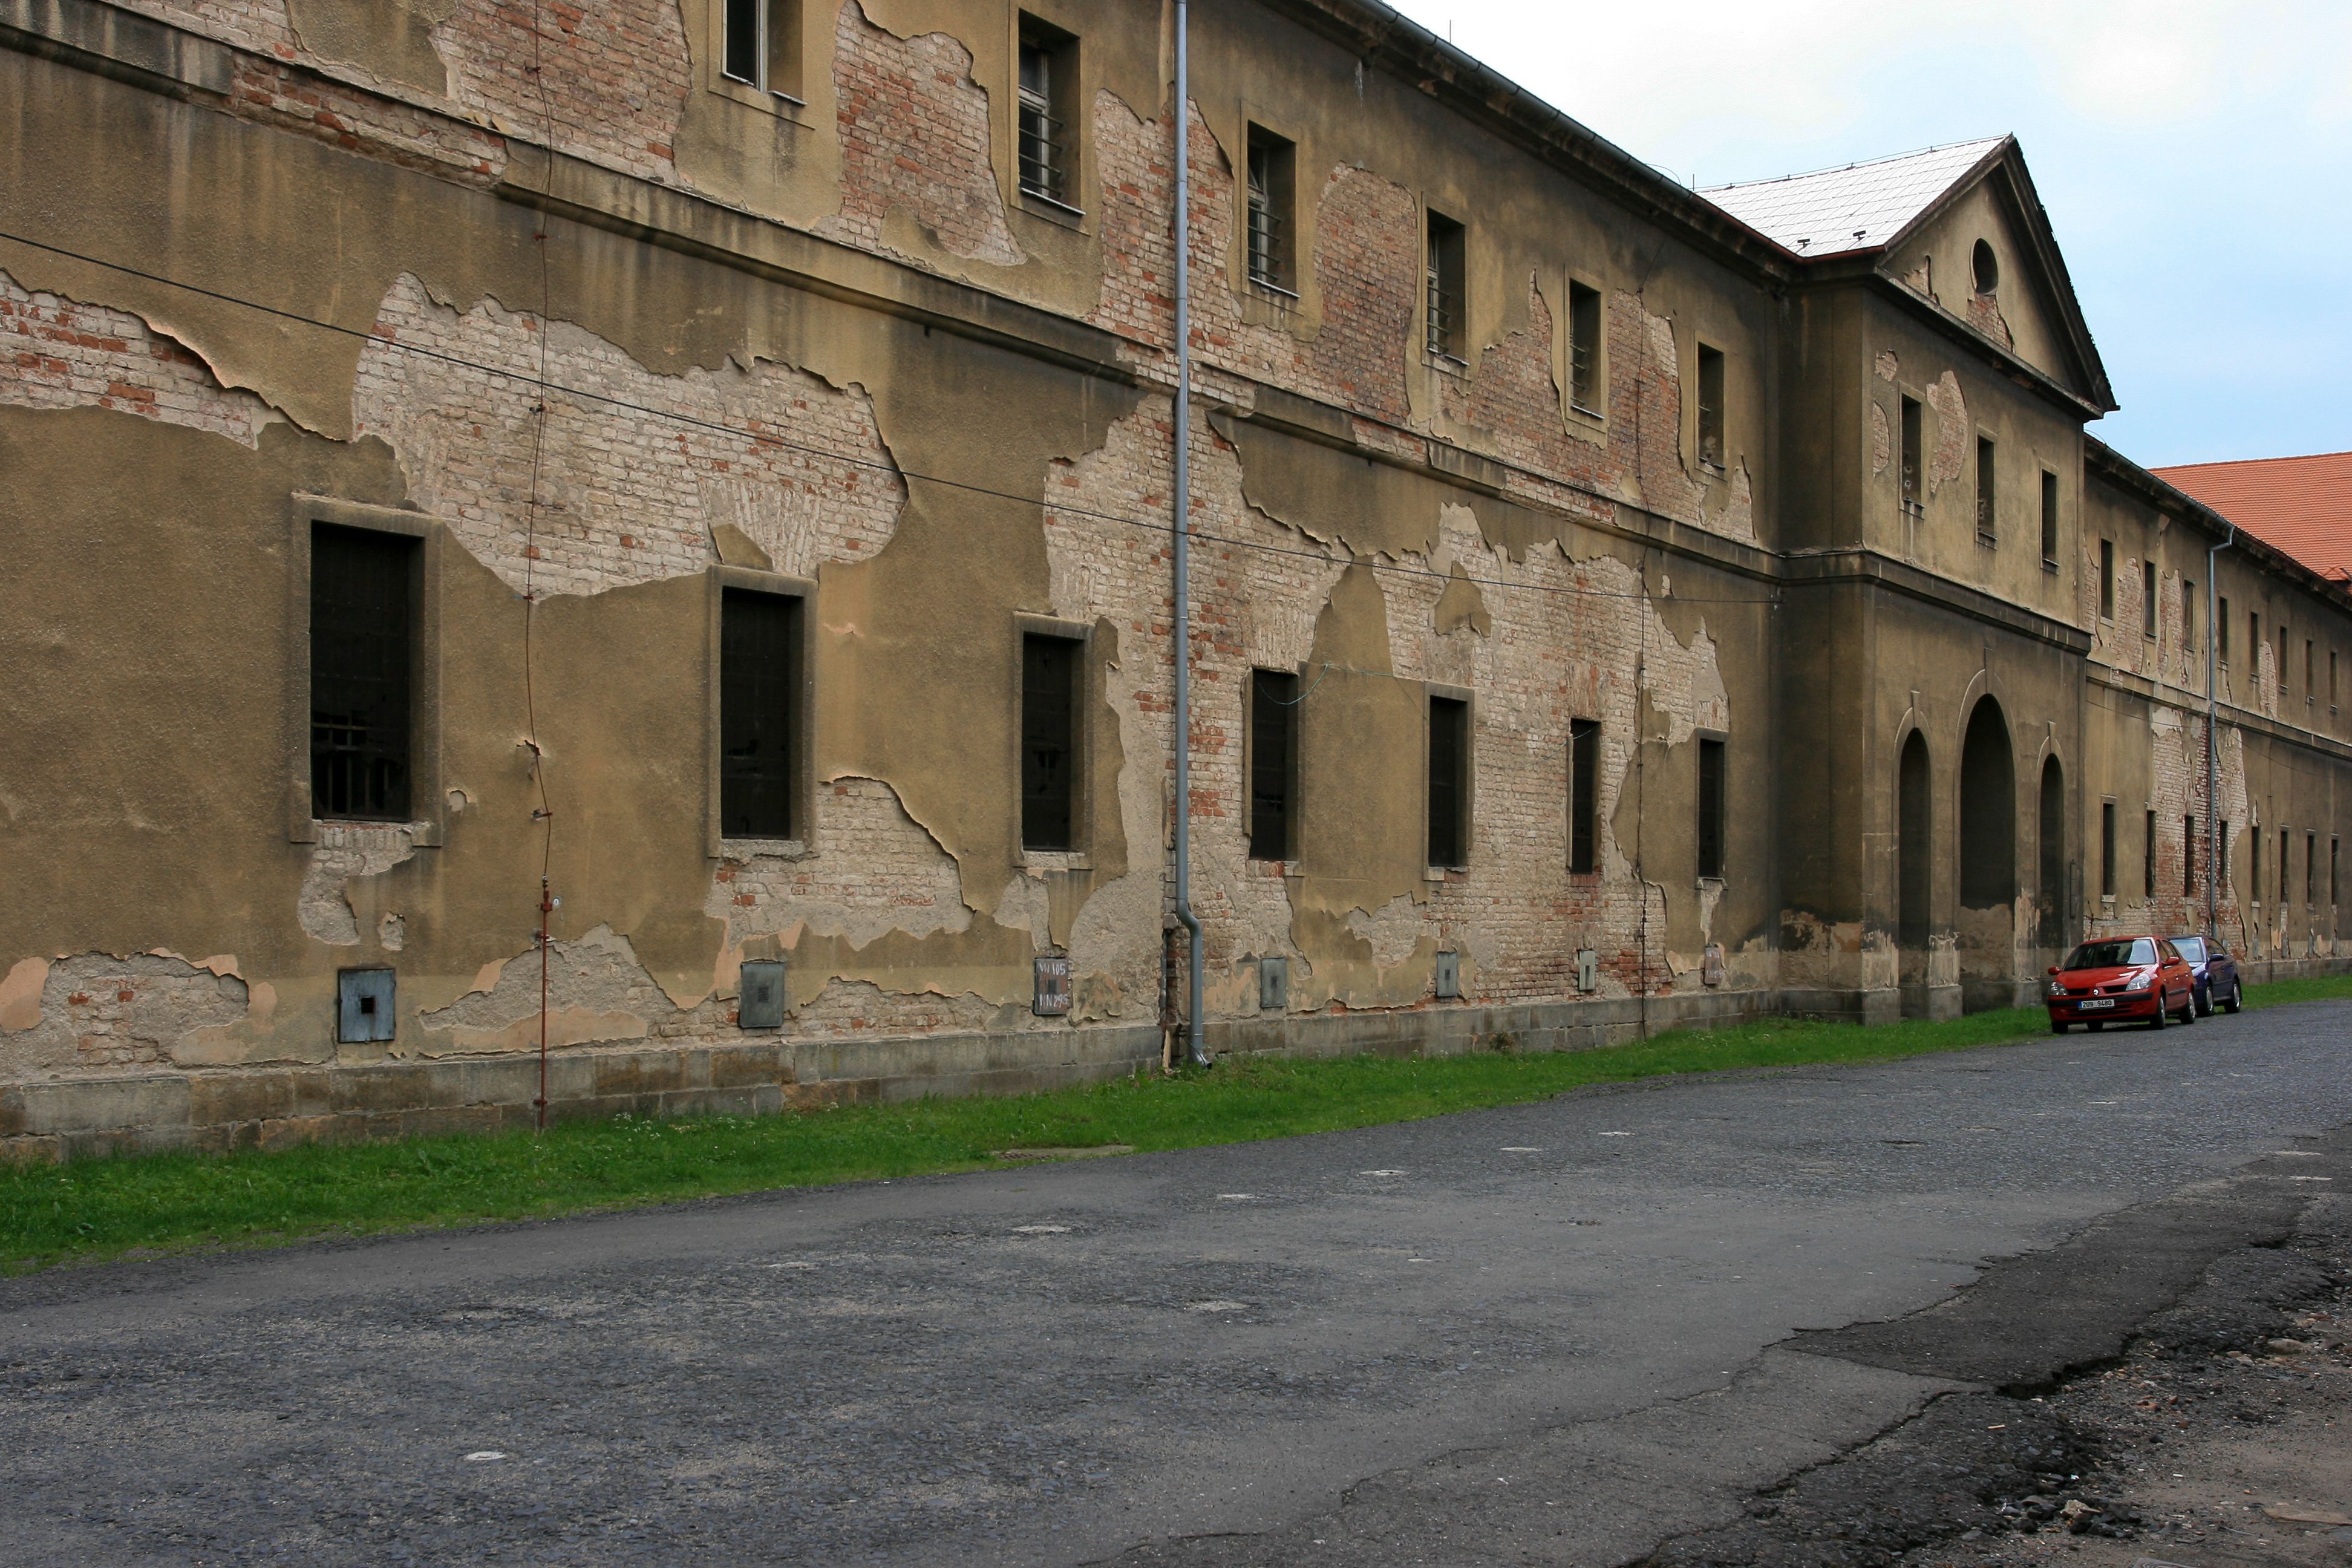 Derelict buildings at the former Jewish ghetto of Terezin, Czech Republic.